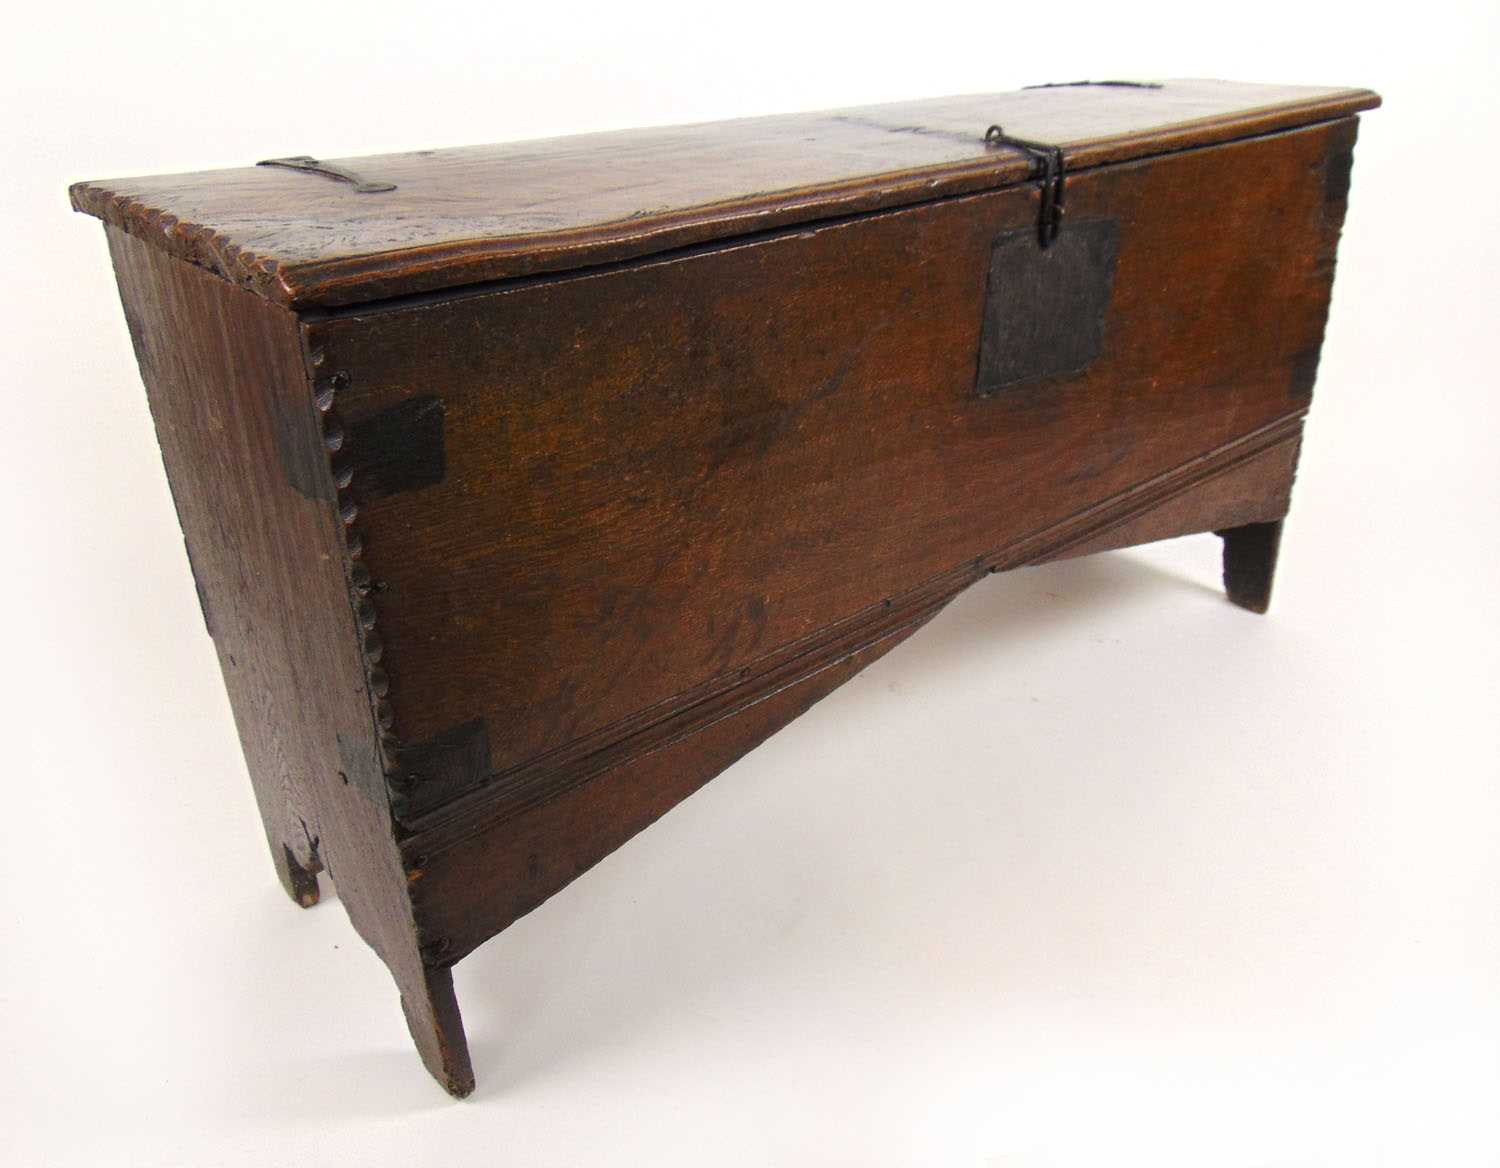 A late 17th century oak six plank coffer, the top lifting to reveal a vacant interior, h. 62 cm, - Image 3 of 3